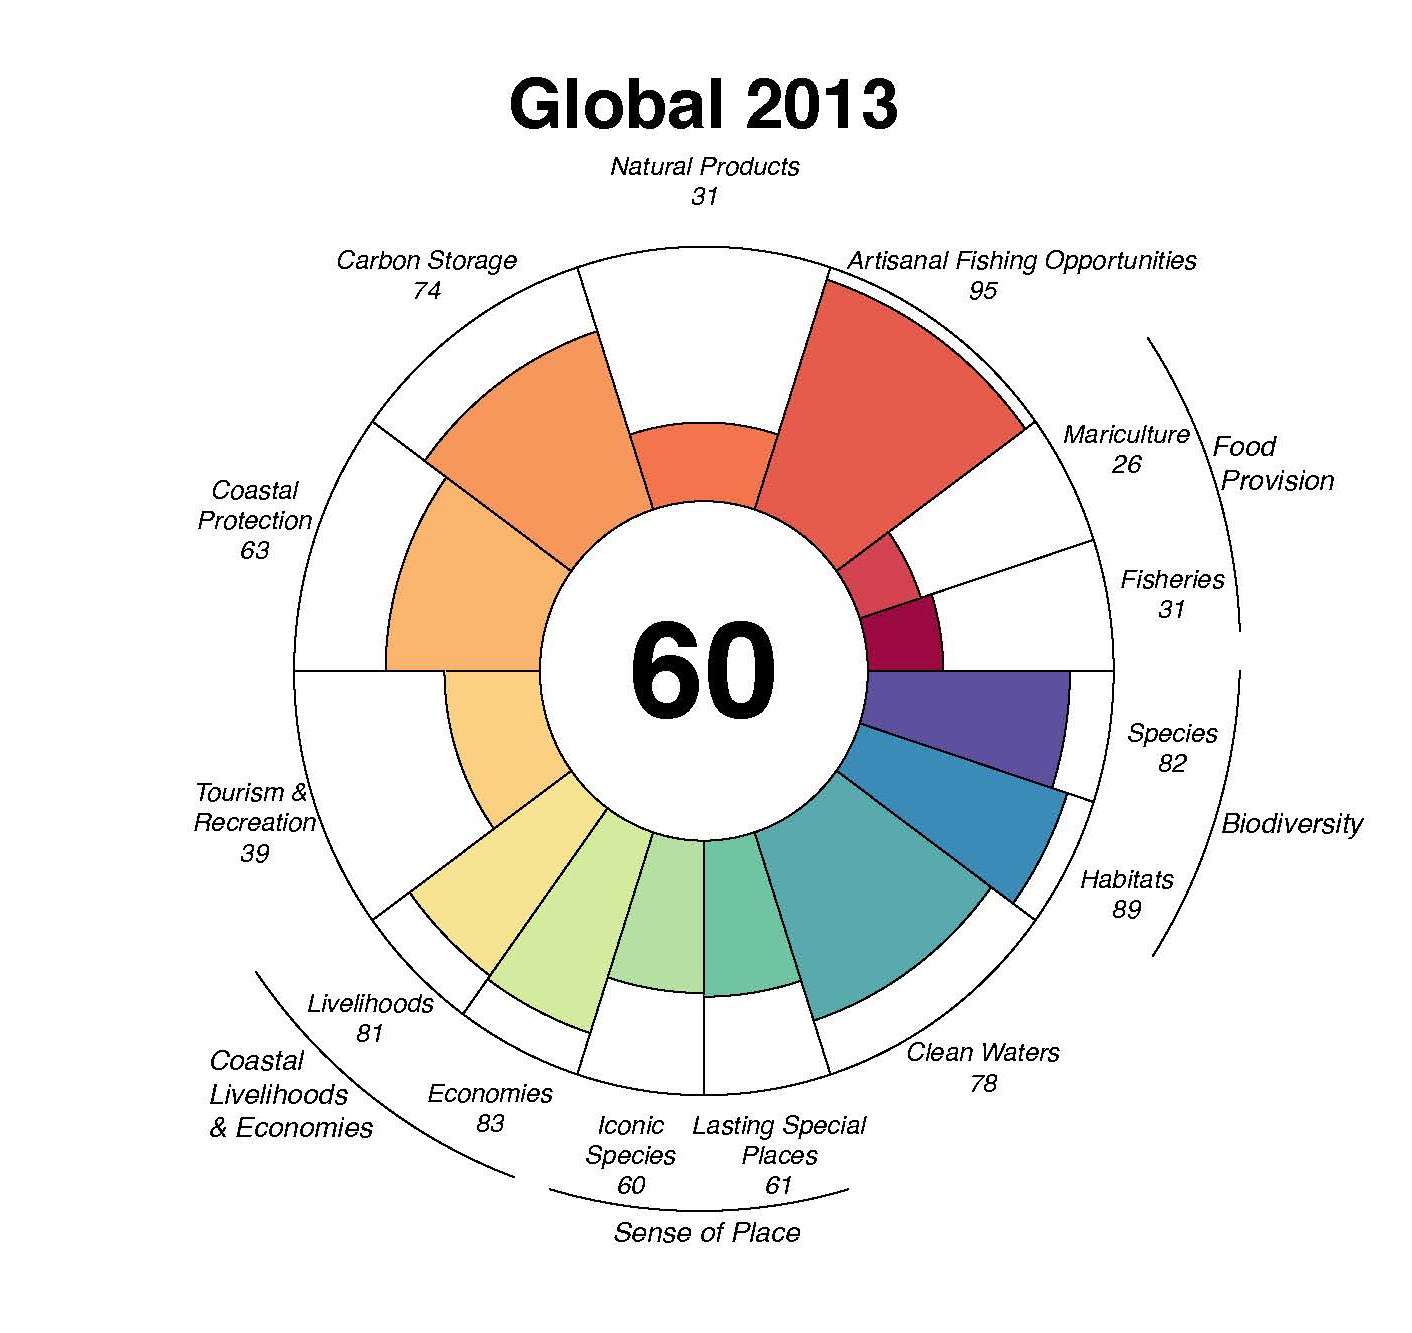 2013 goal scores for the Ocean Health Index